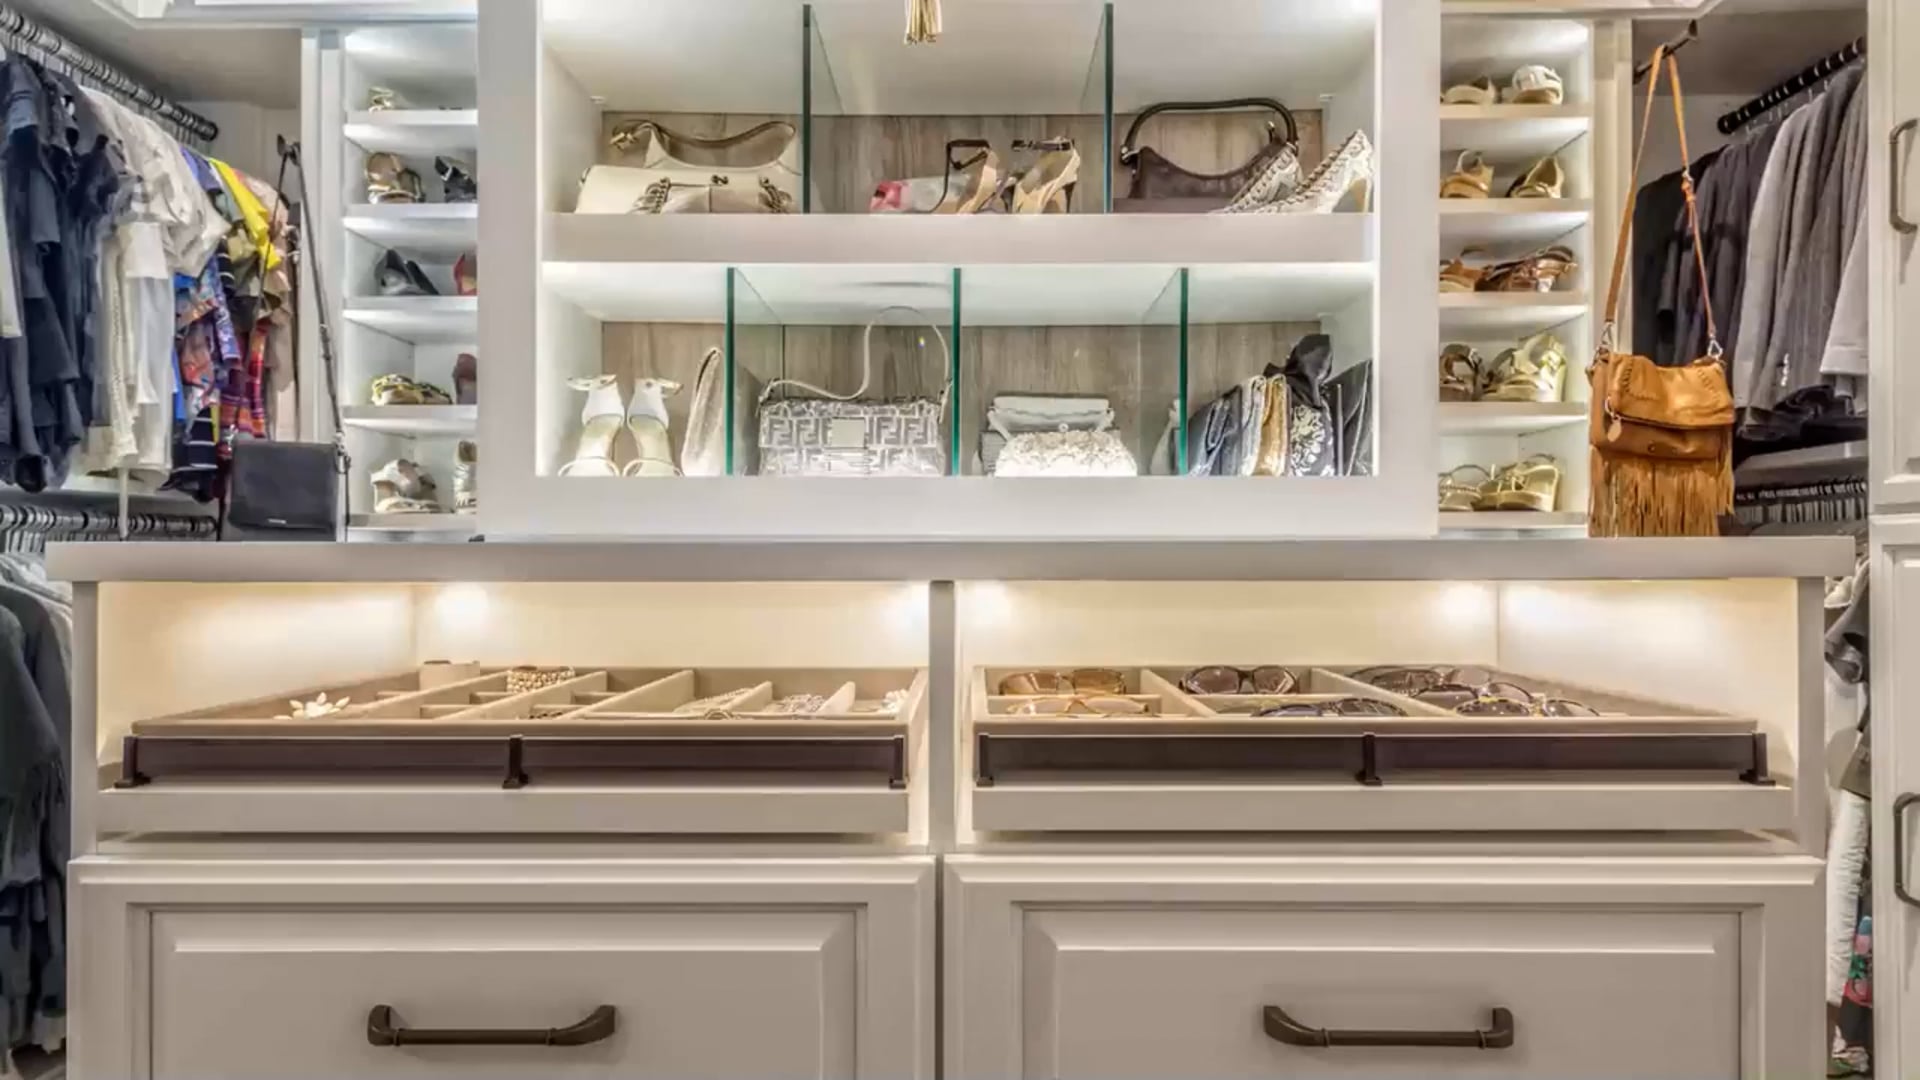 Giant Walk-In Closet - Showplace Cabinetry